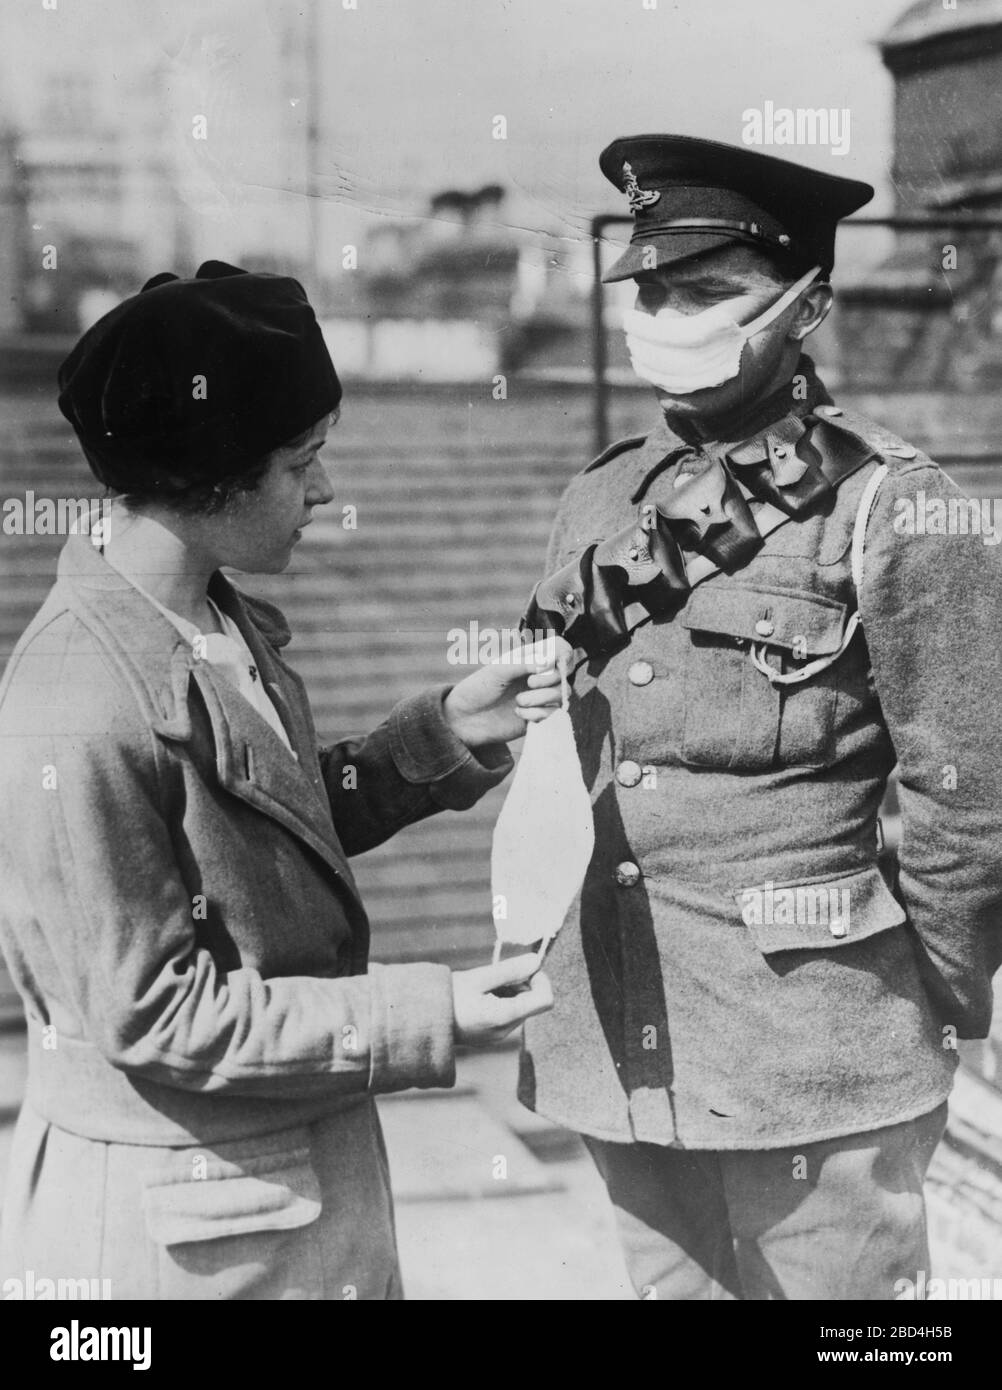 British soldier wearing a face mask to protect against poison gas, standing with a woman holding another face mask, during World War I ca. 1914-1915 Stock Photo